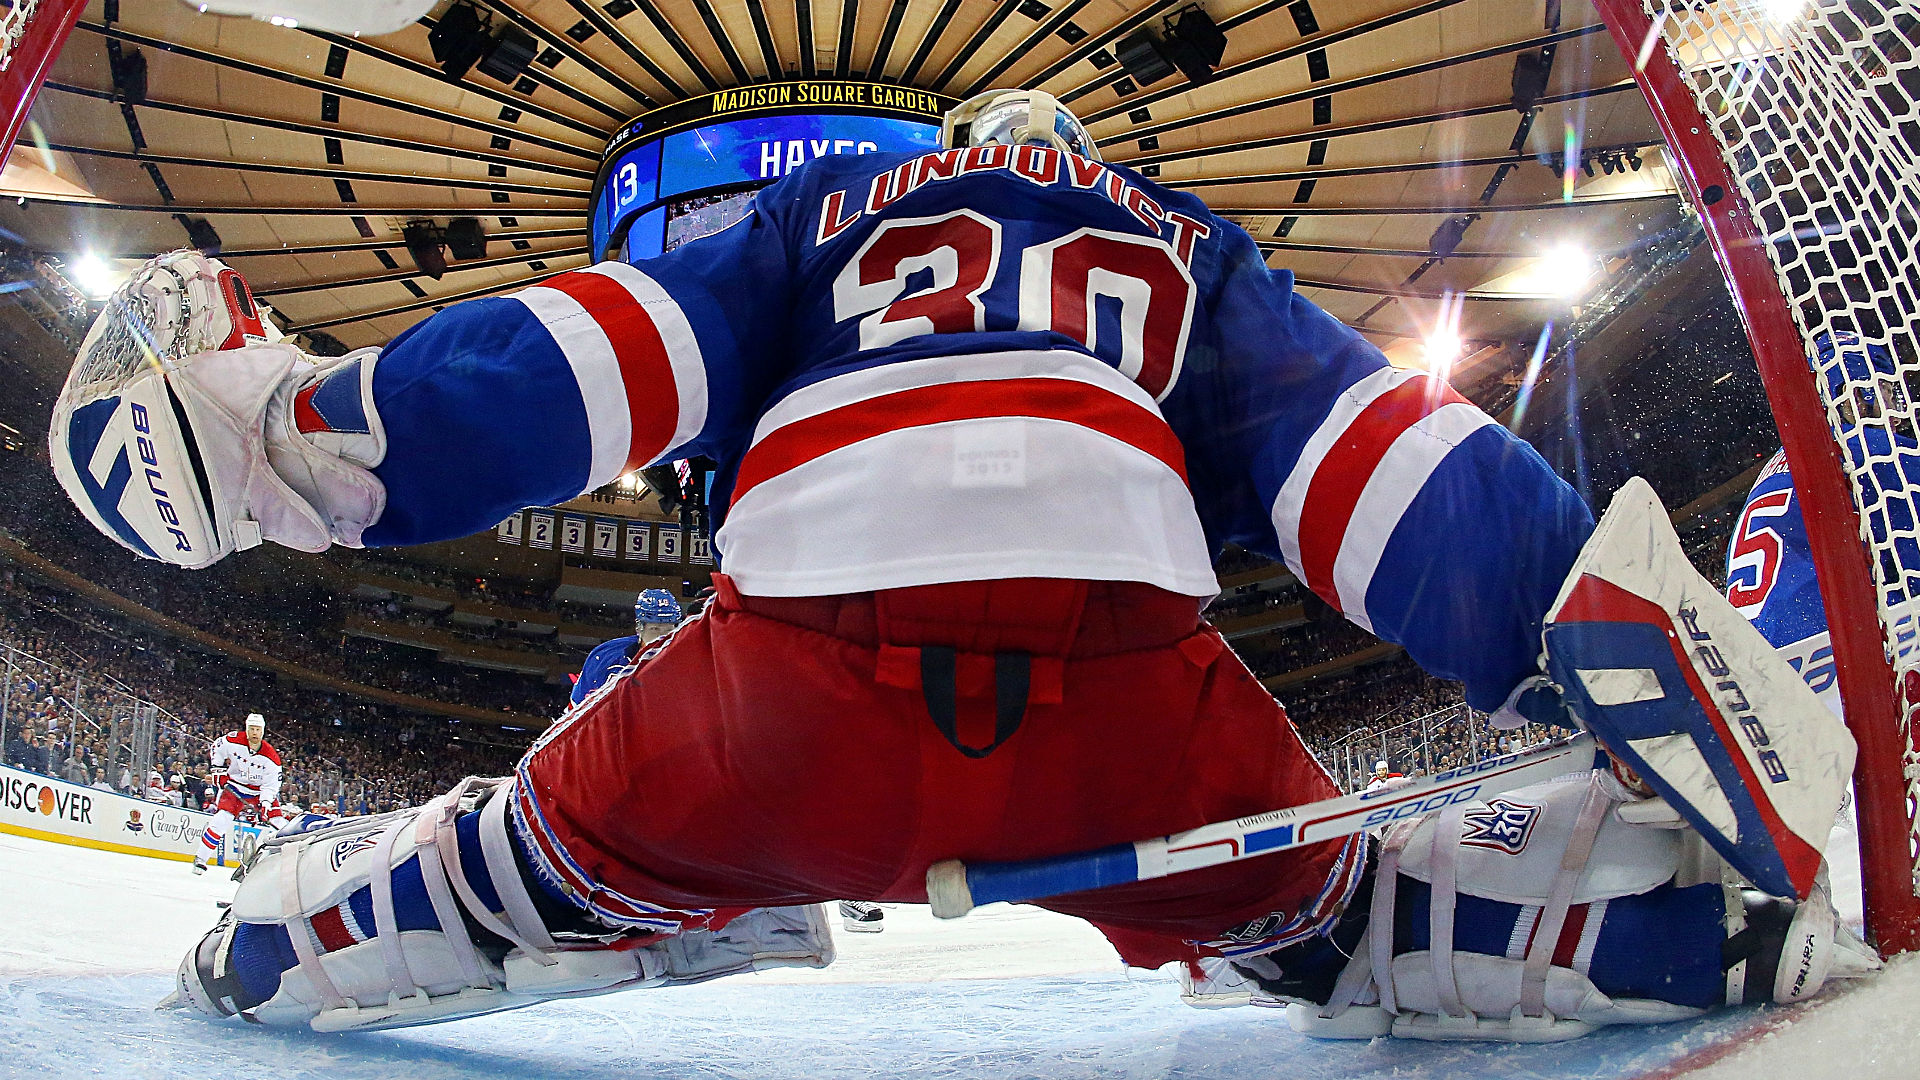 Lundqvist adds to Game 7 legend as Rangers advance to Eastern finals